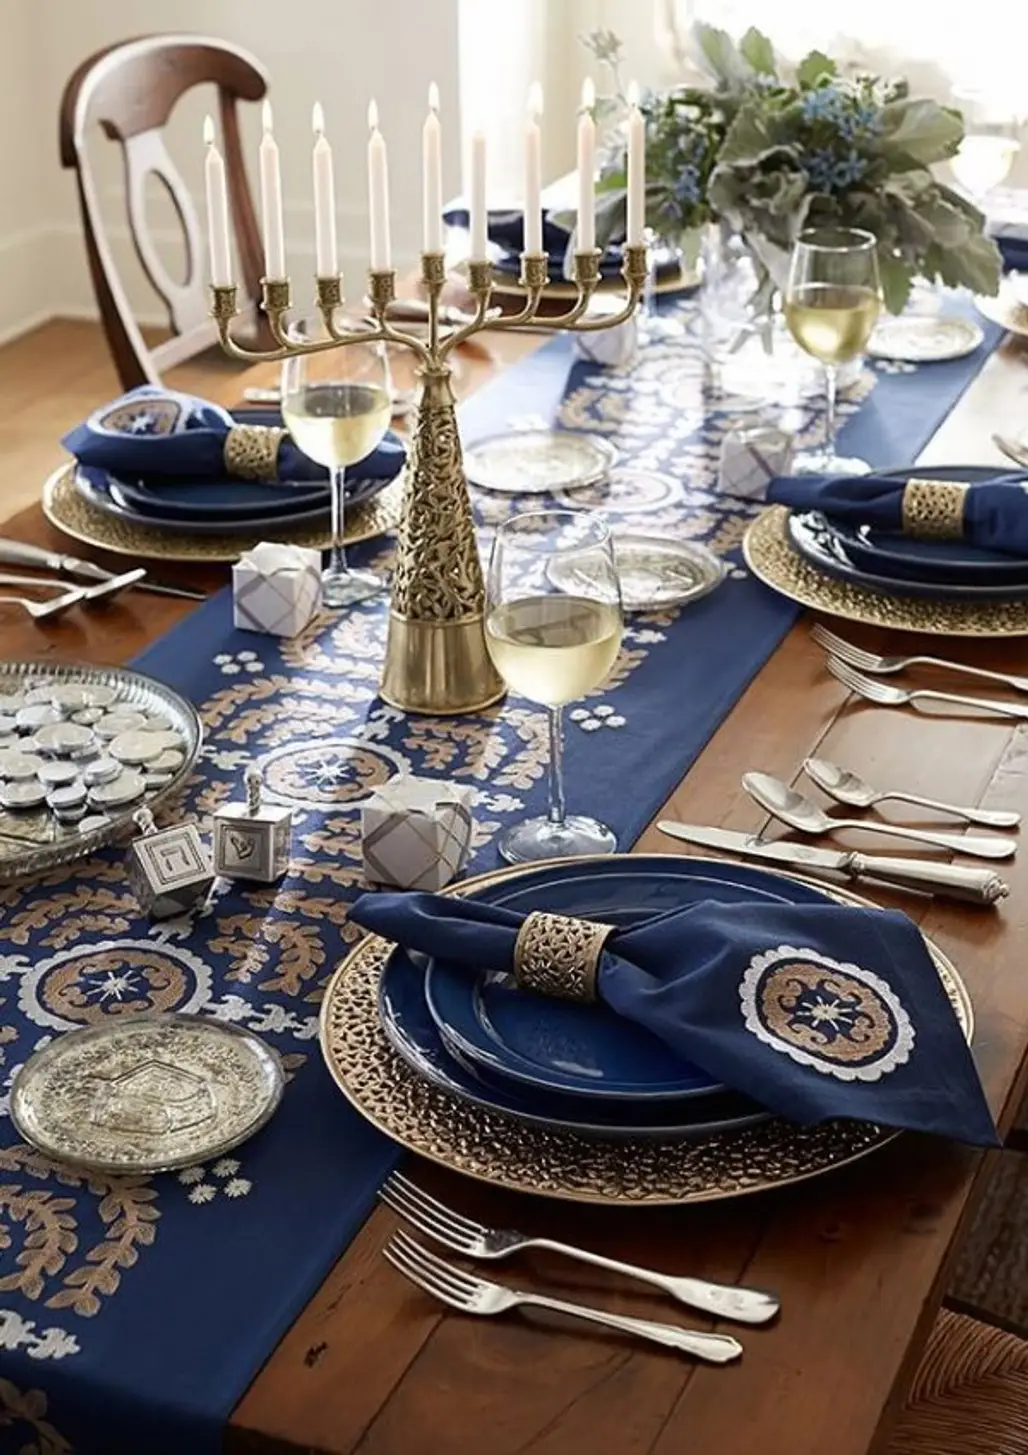 Use a Table Runner